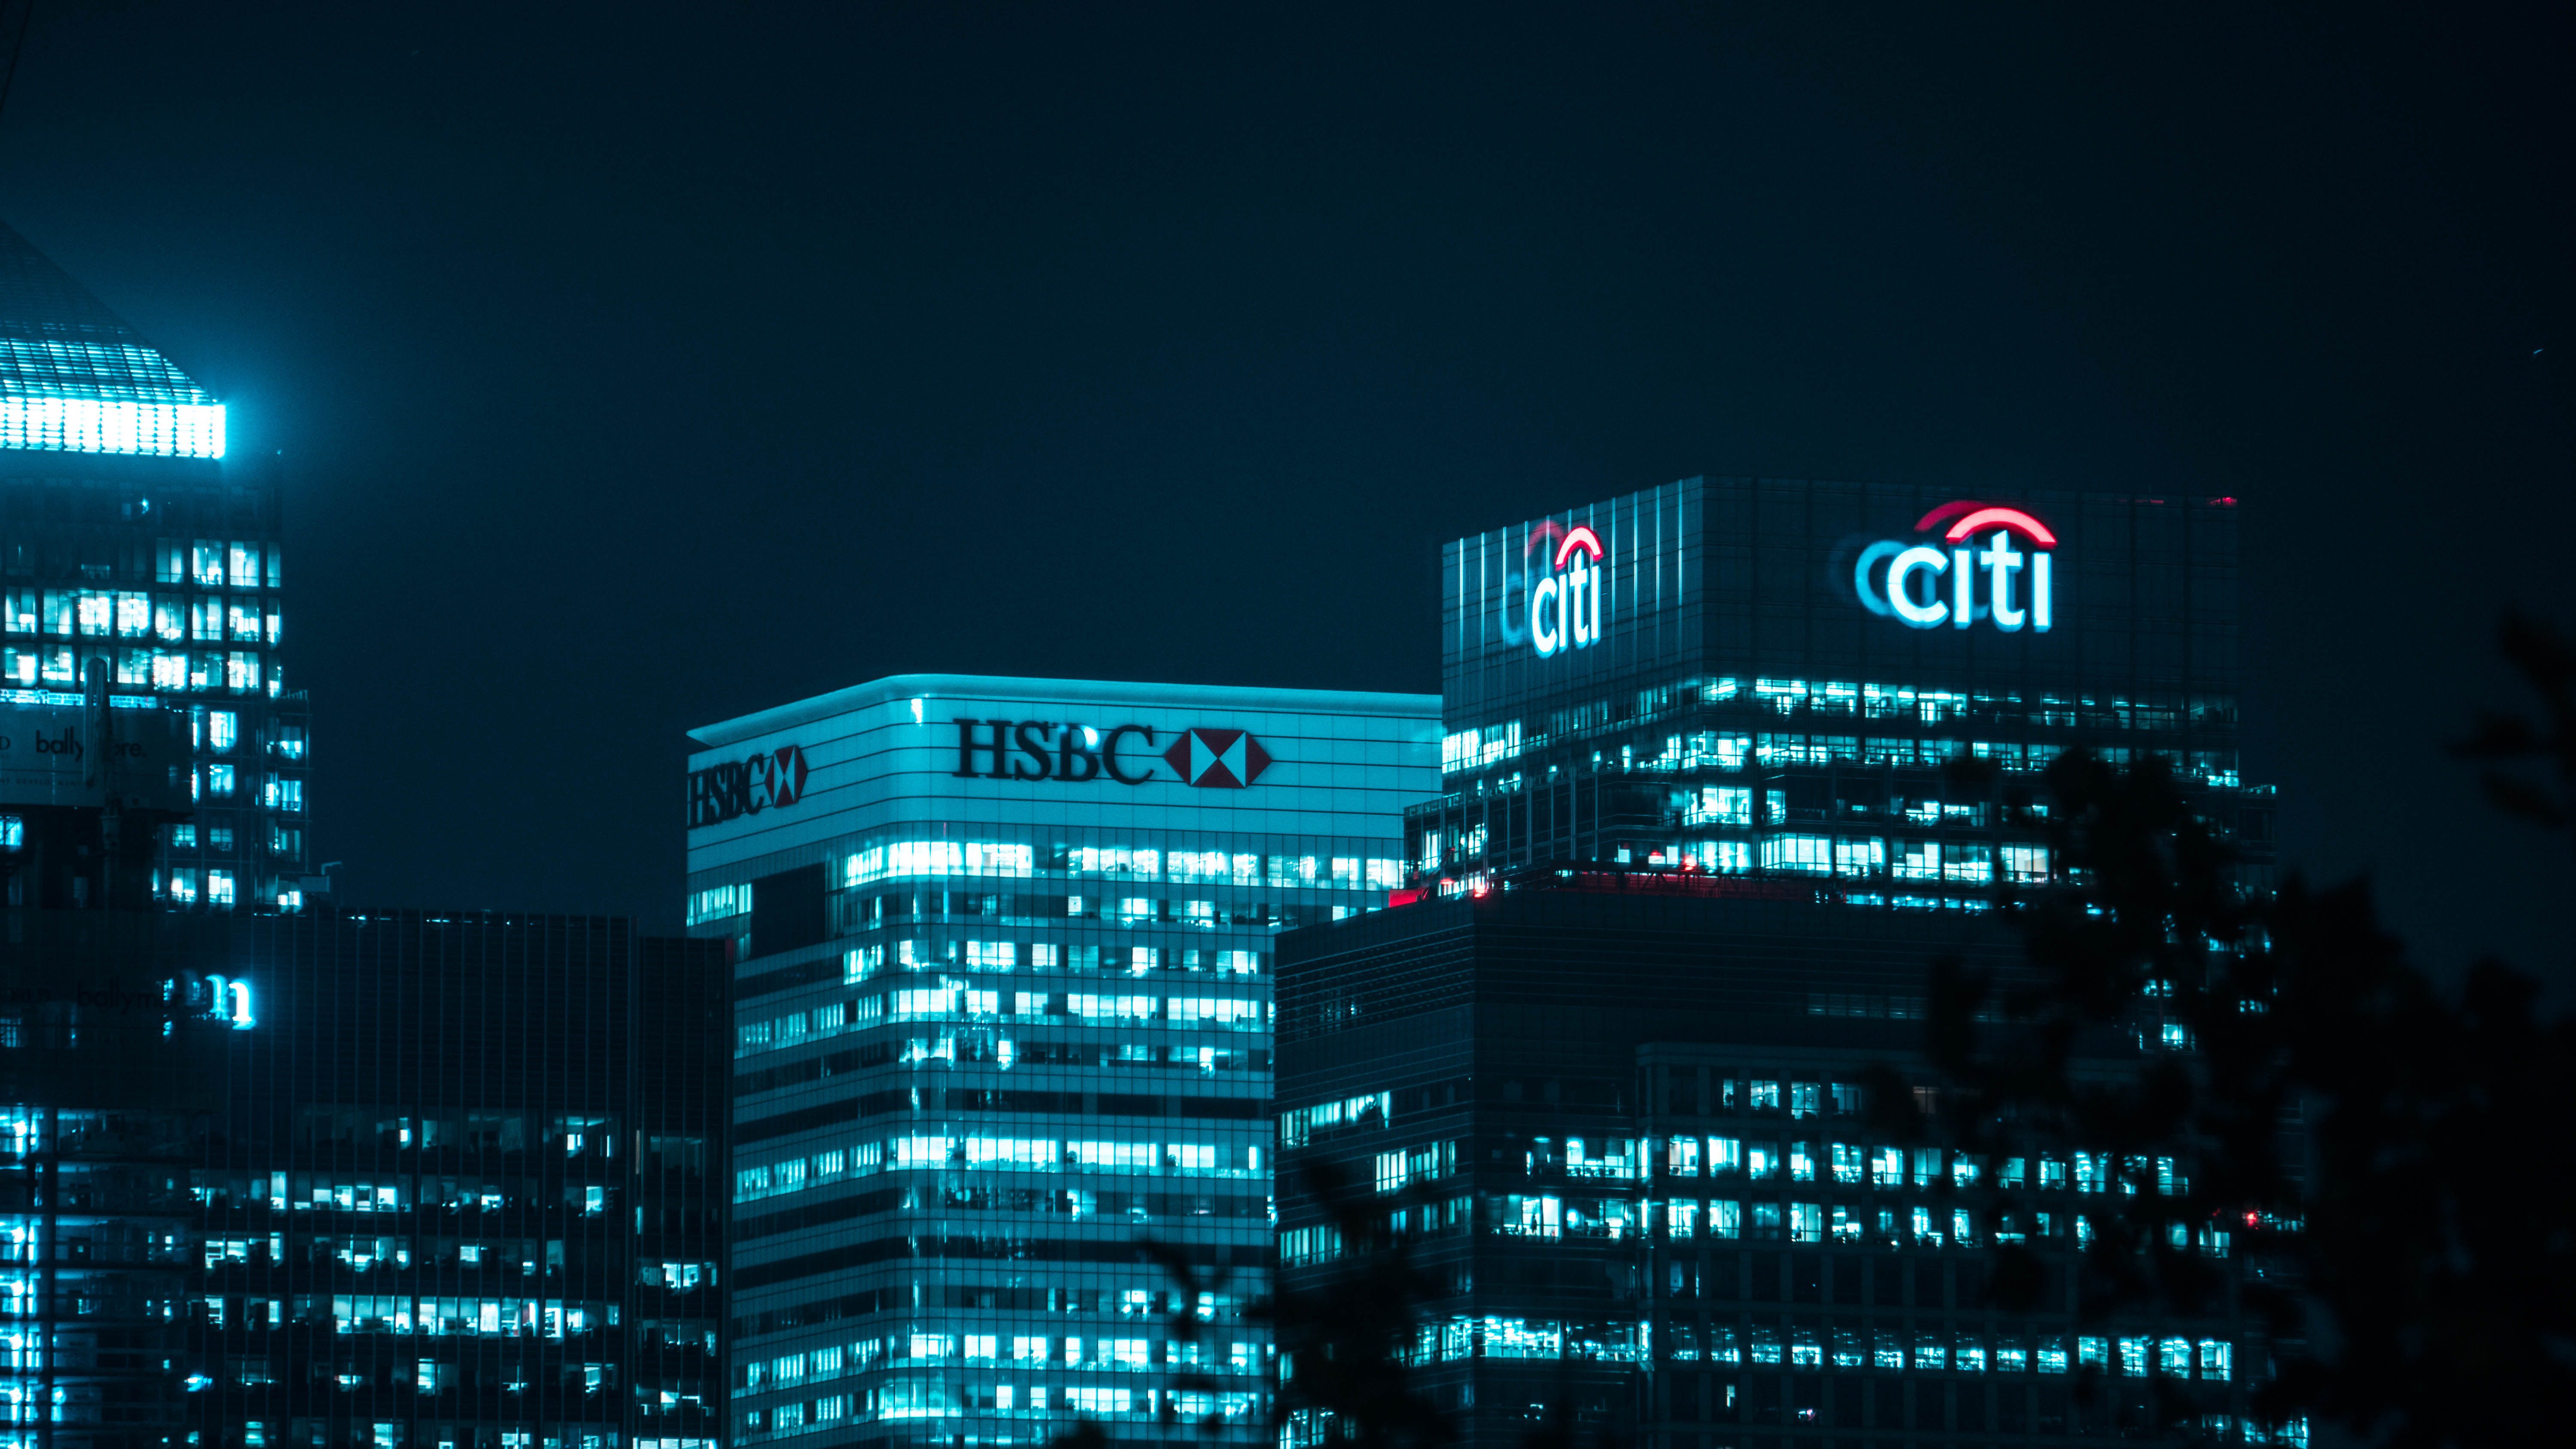 Finance buildings with dark background